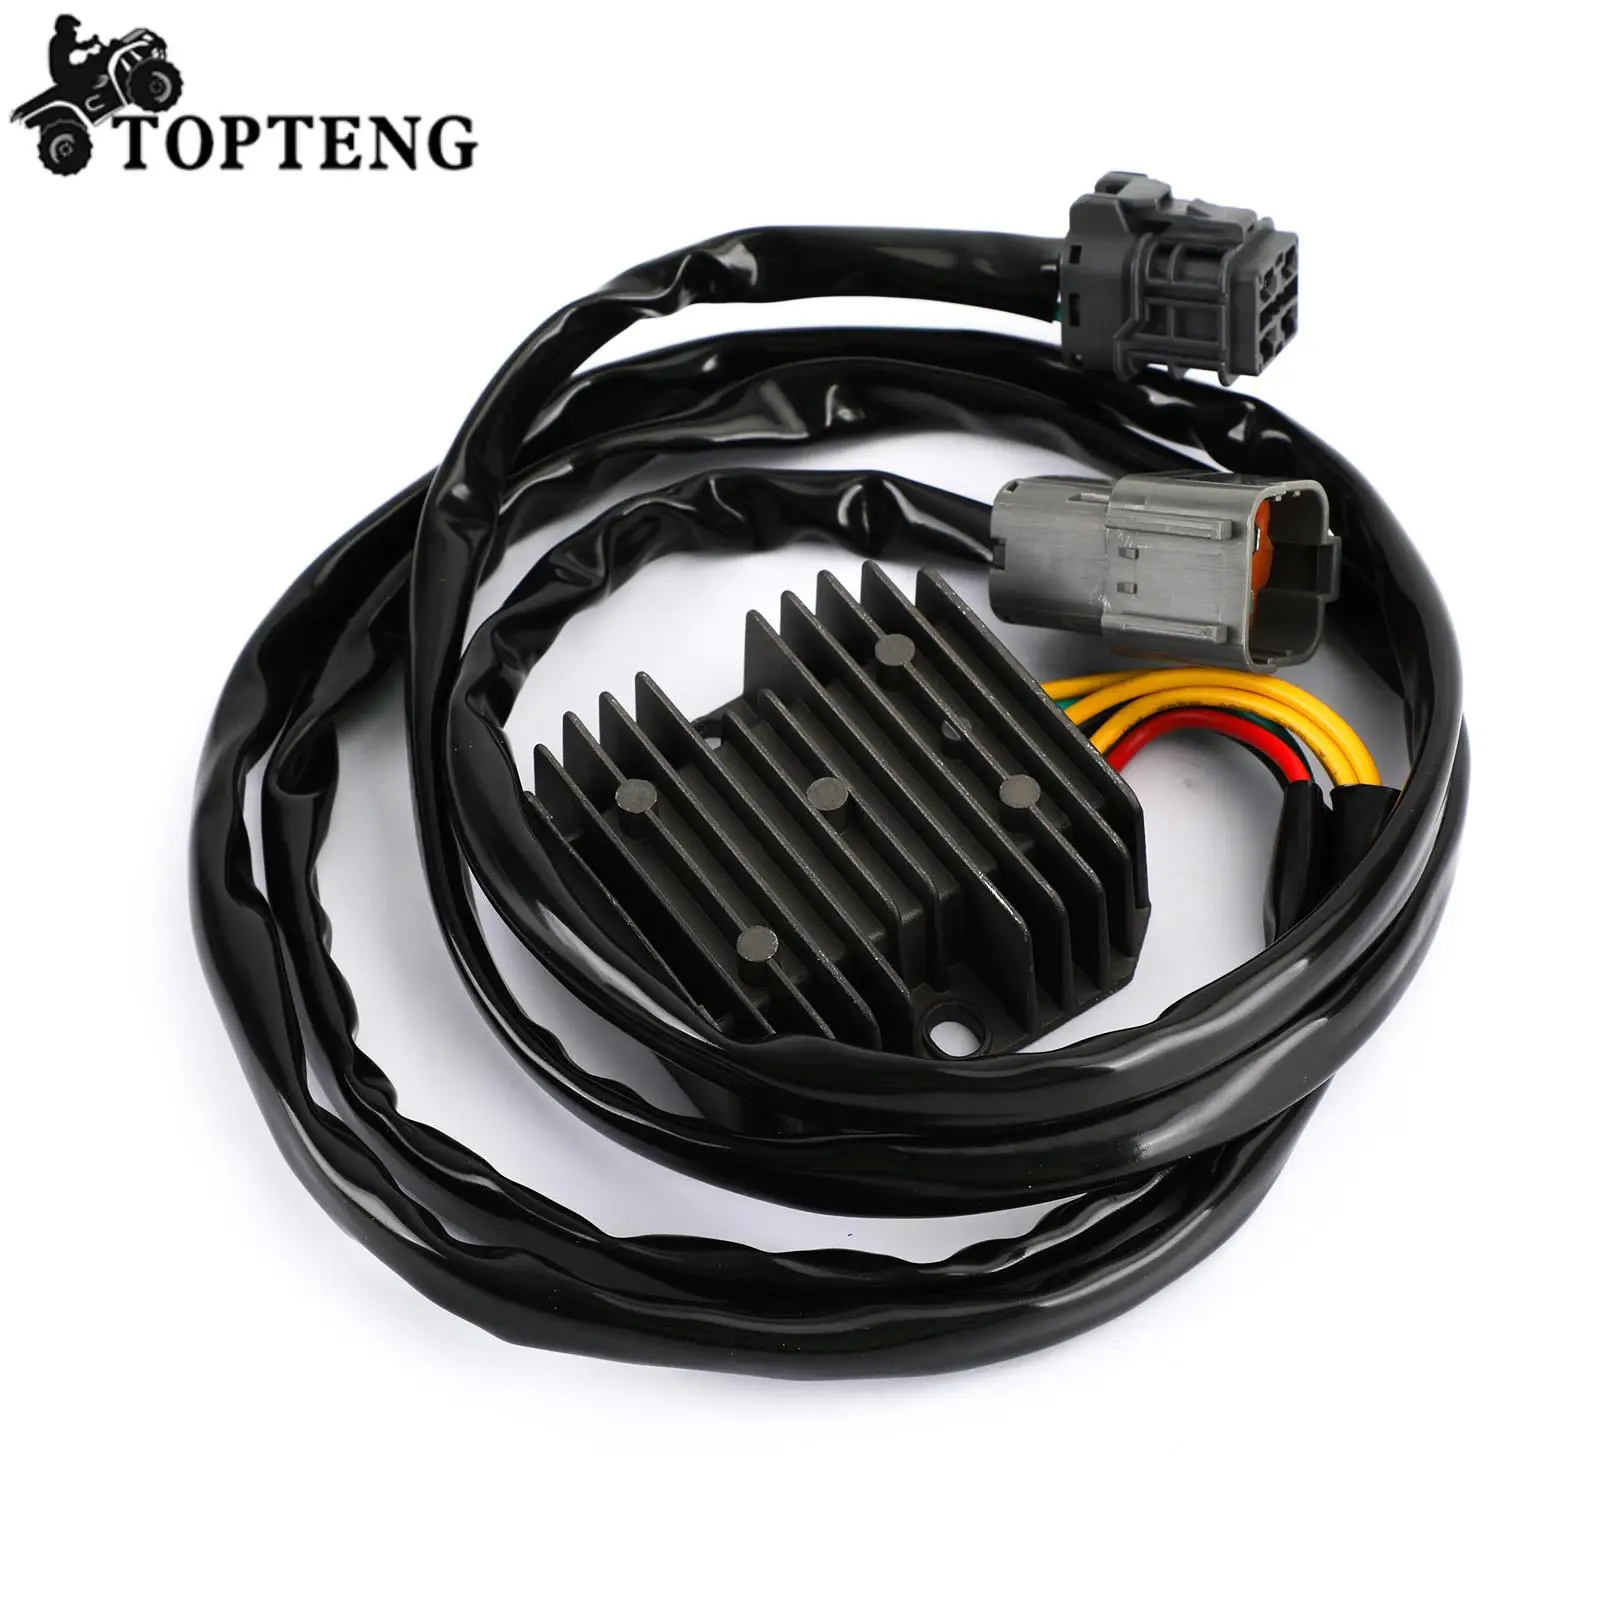 

Topteng VOLTAGE REGULATOR Fit for KAWASAKI KVF300 BRUTE FORCE 300 2012-2020 21066-Y002 Motorcycle Accessories Parts